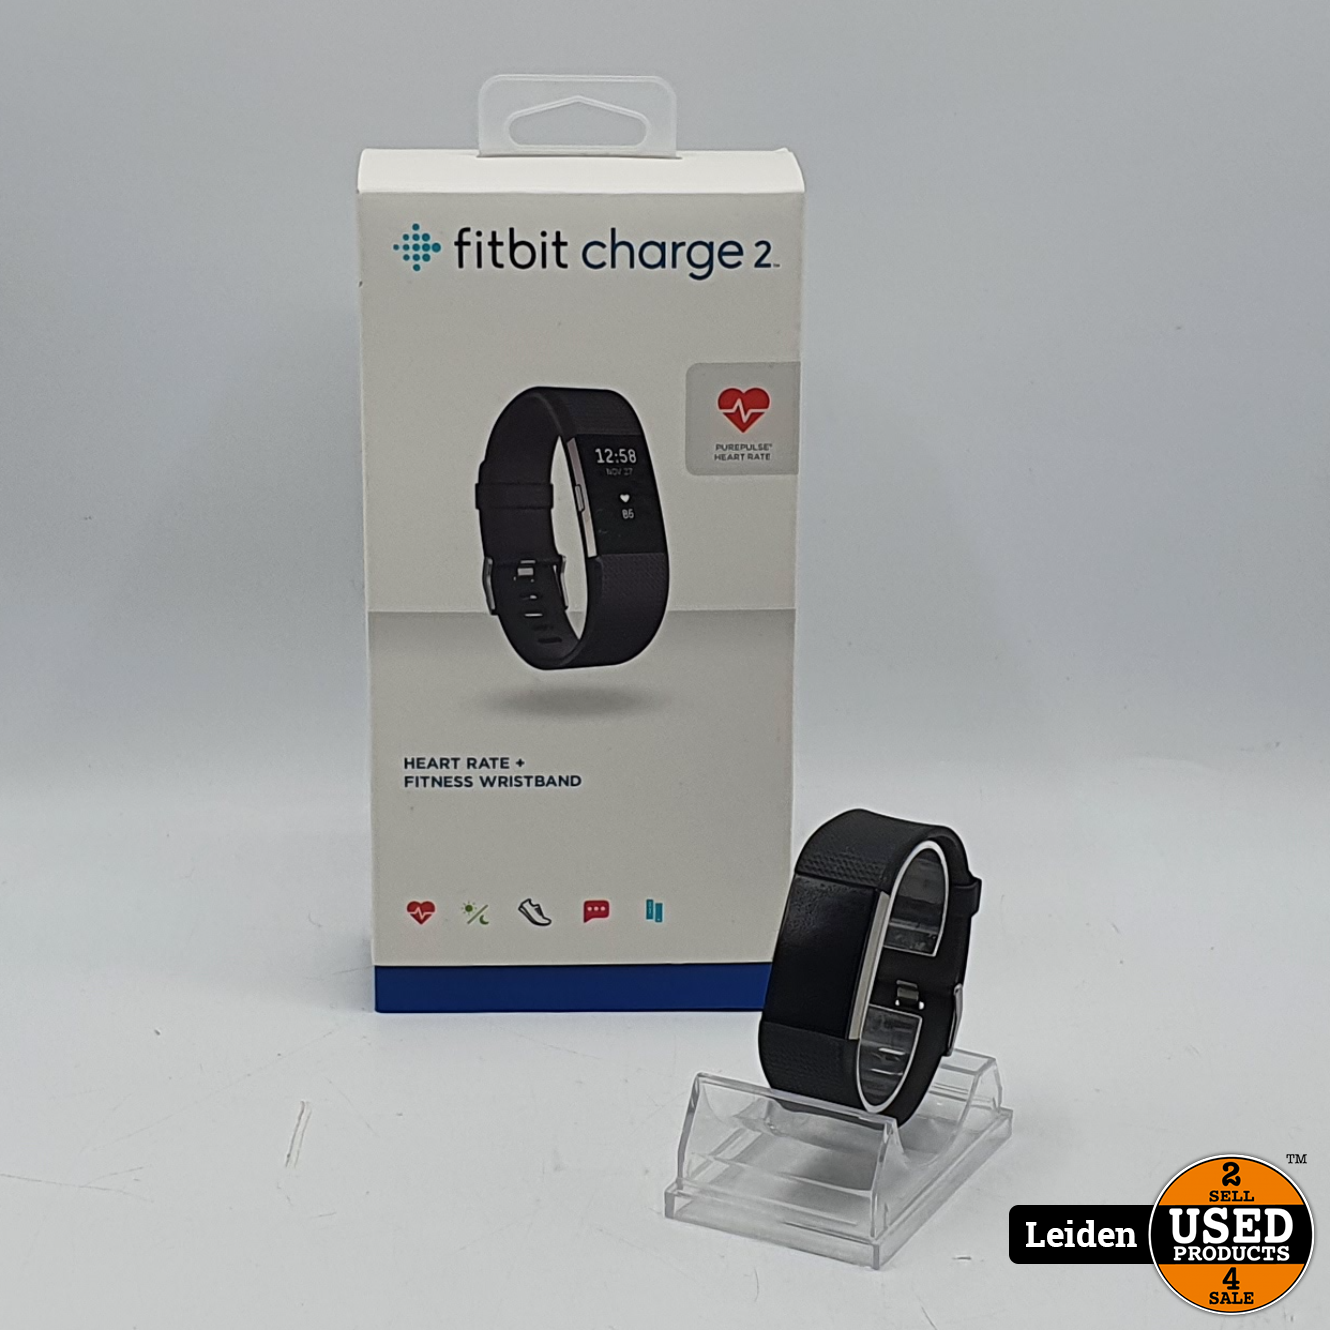 fitbit charge 2 used for sale